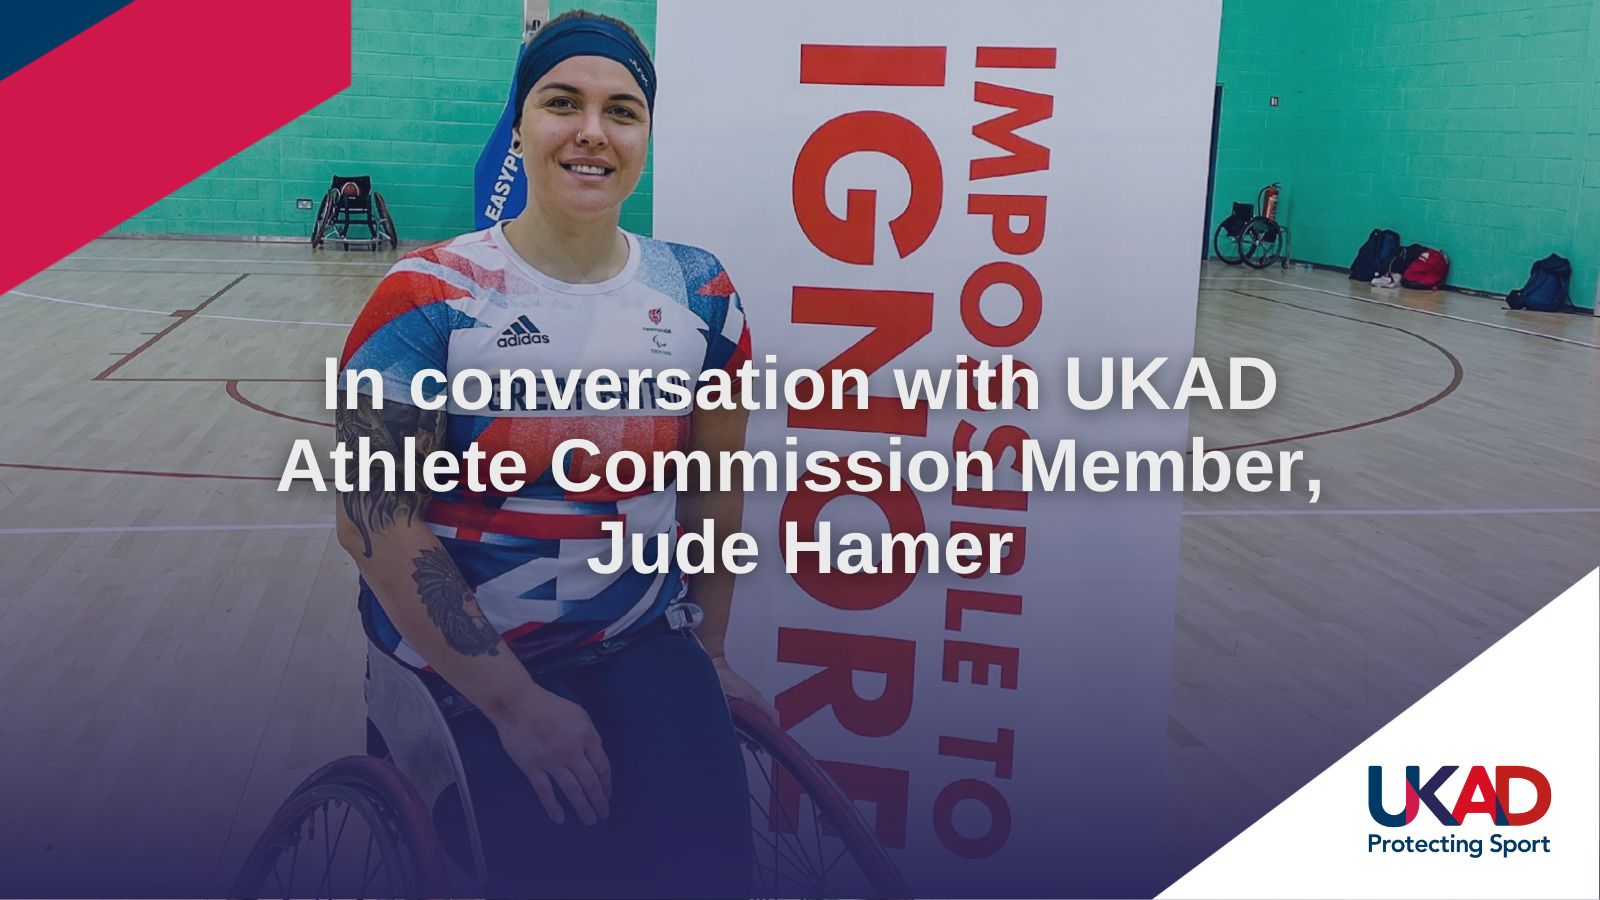 An image of UKAD Athlete Commission member Jude Hamer with the words;  In conversation with UKAD Athlete Commission Member, Jude Hamer